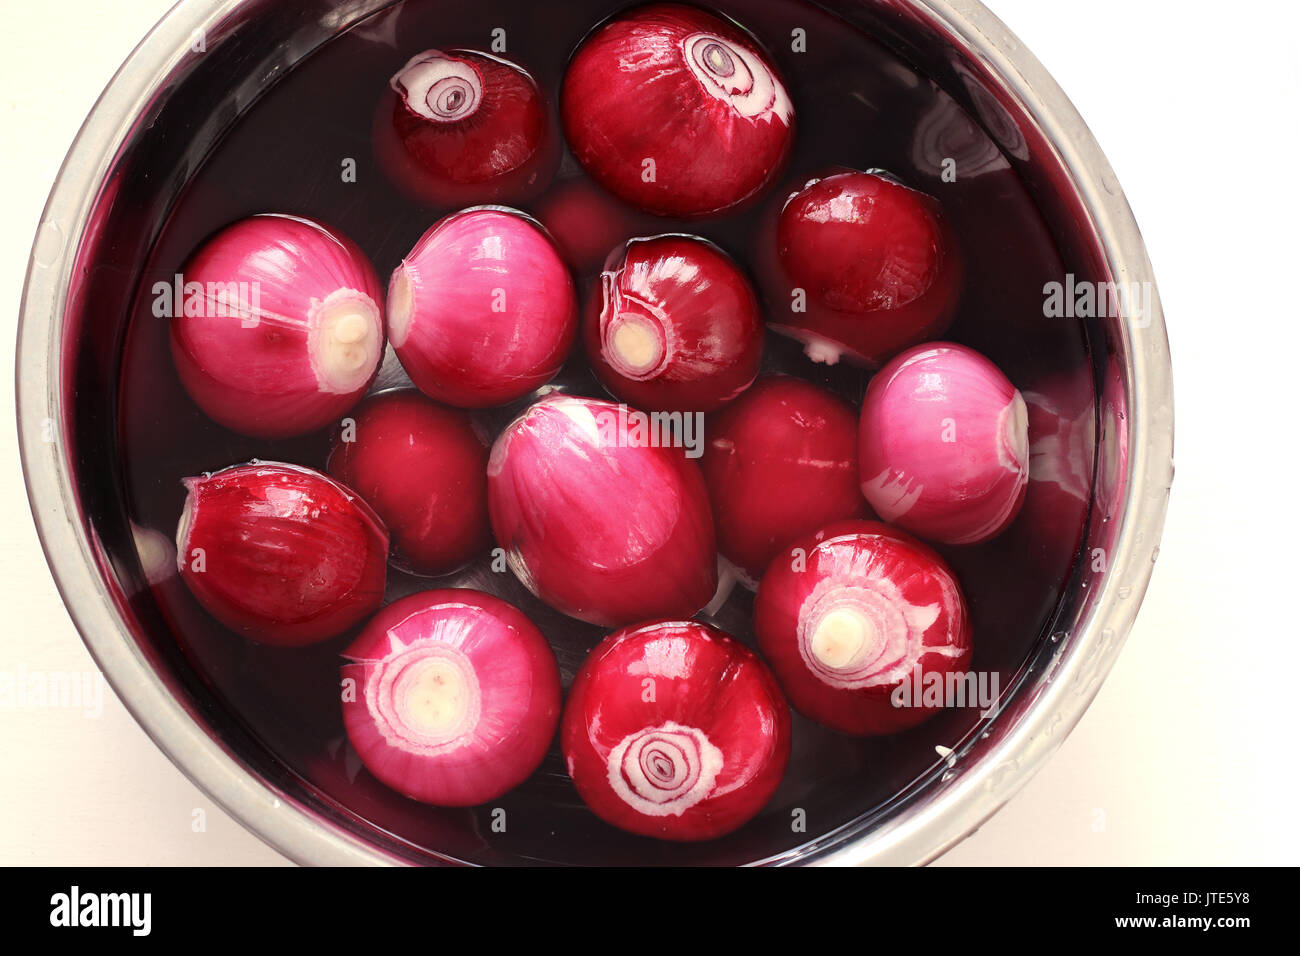 Allium cepa or known as Red onions with skin off  soaking in the water Stock Photo